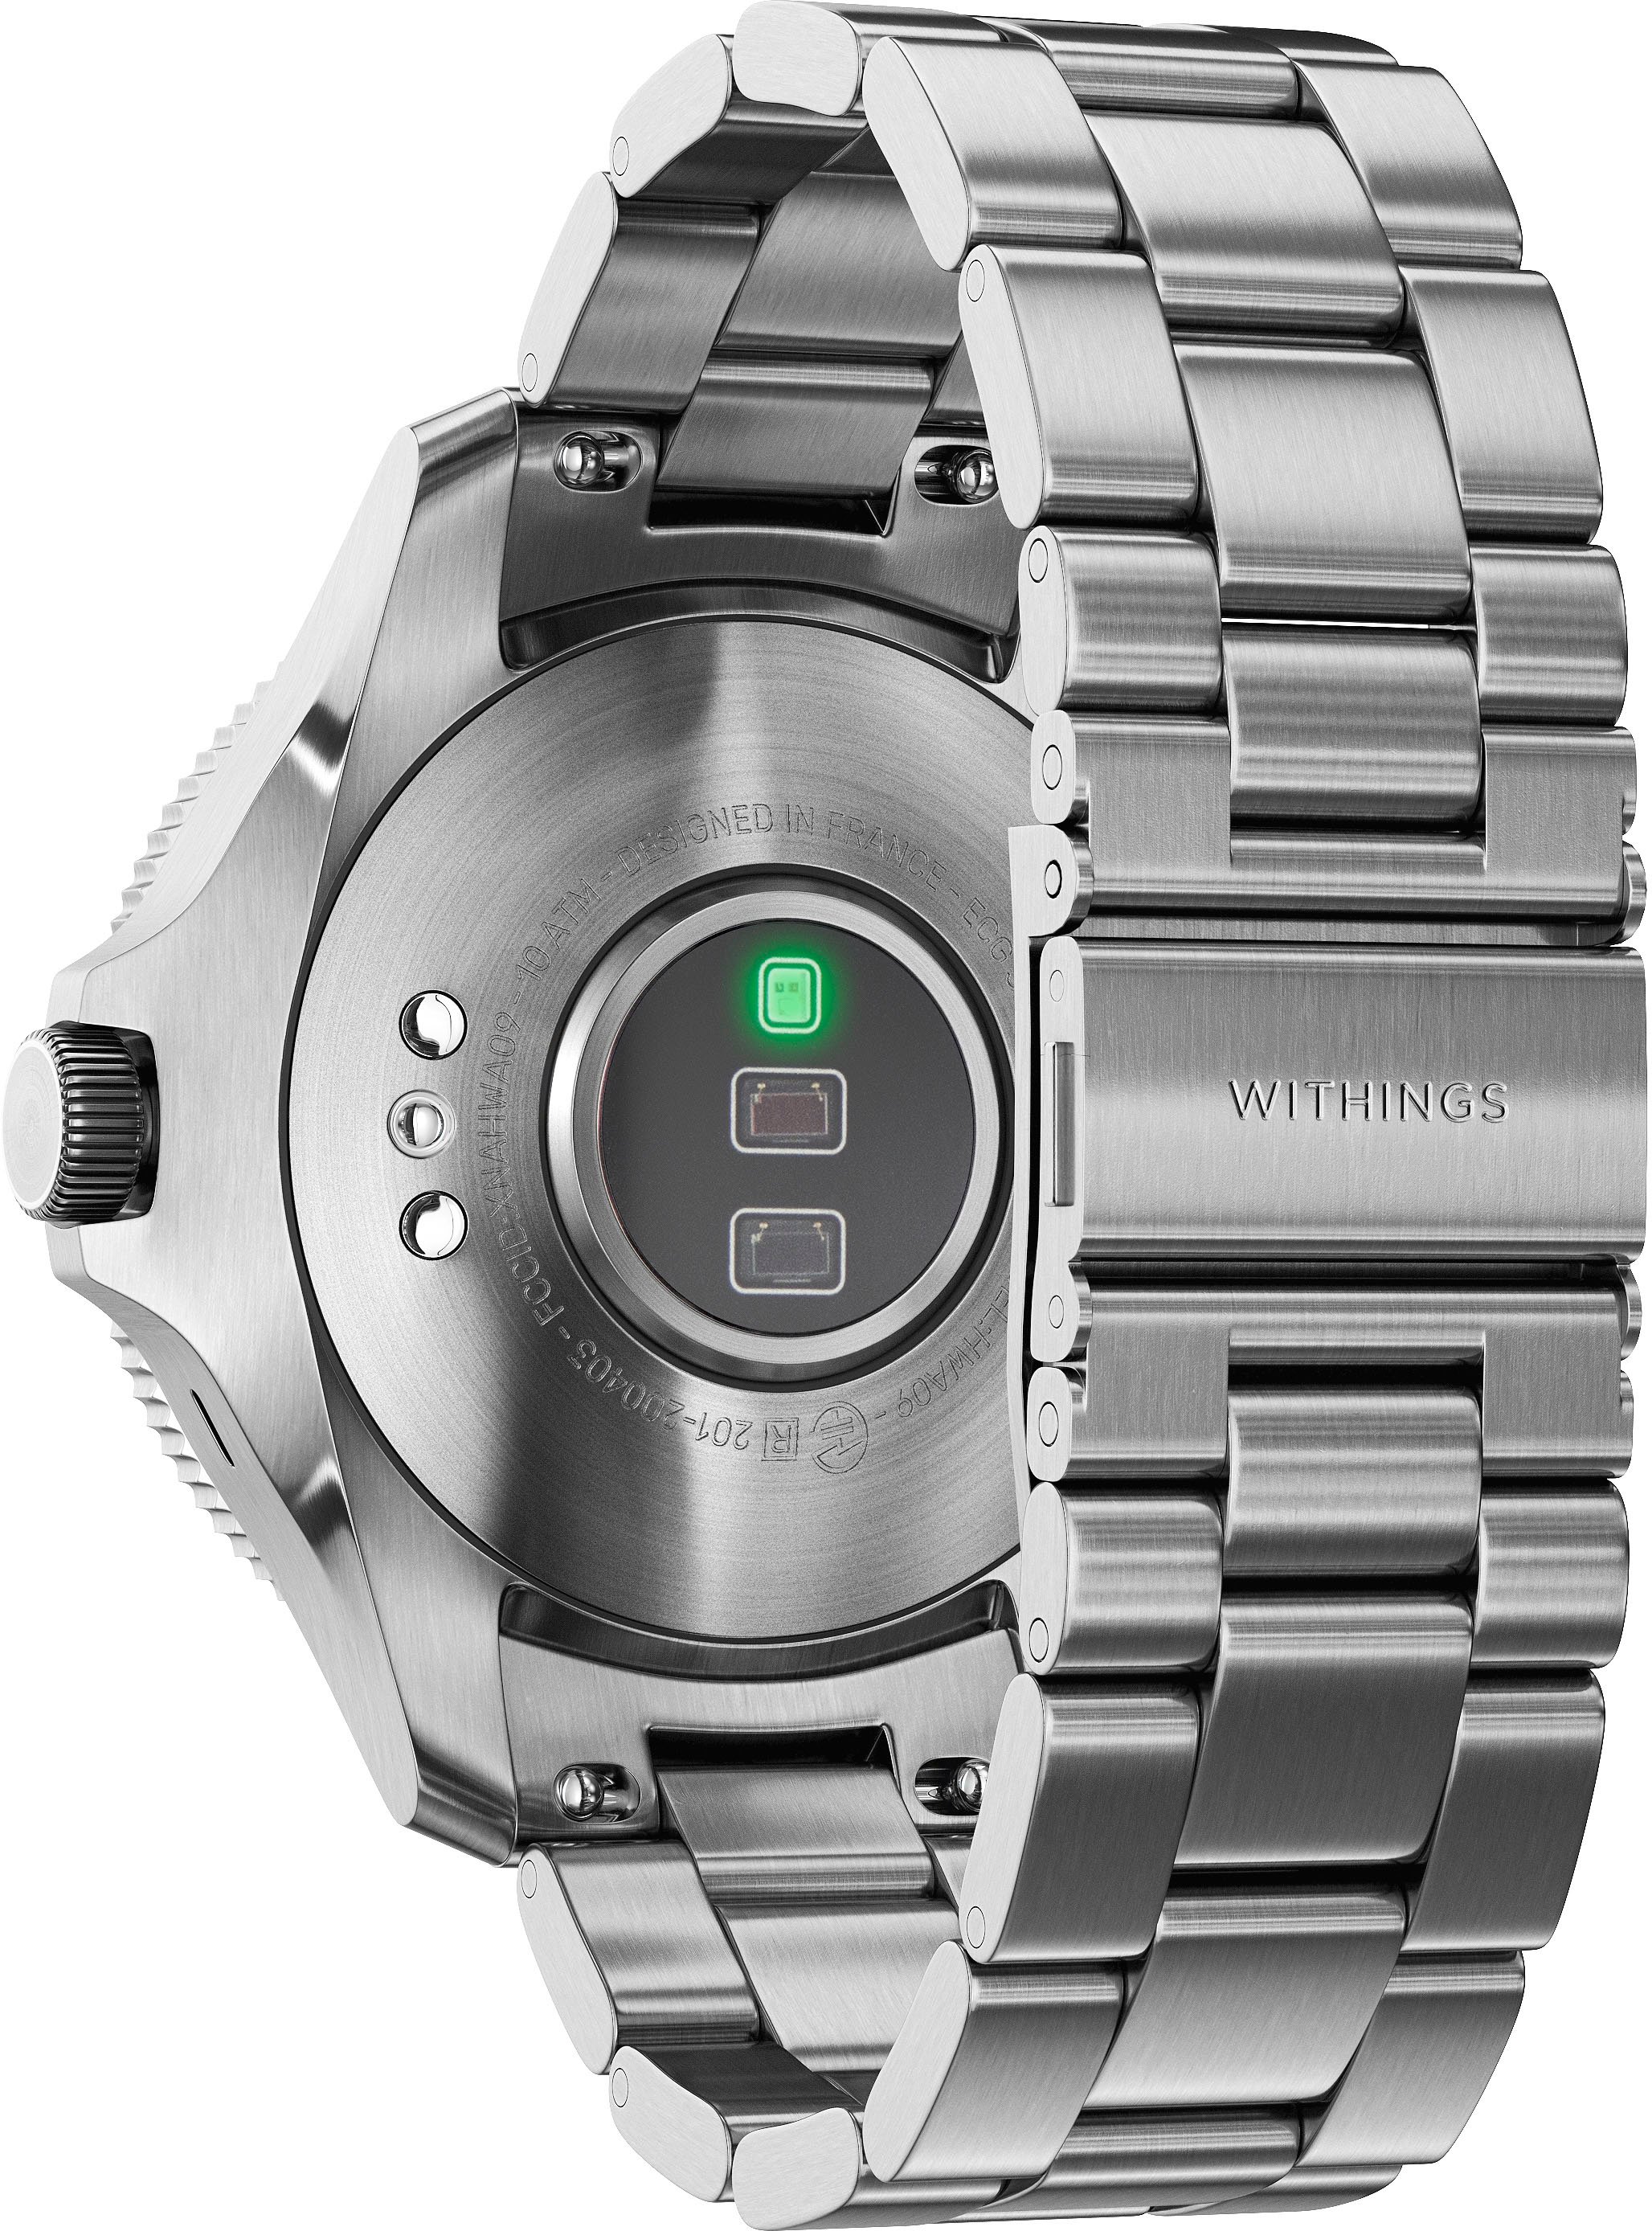 Back View: Withings - Scanwatch Horizon - Hybrid Smartwatch with ECG, heart rate and oximeter - 43mm - Green